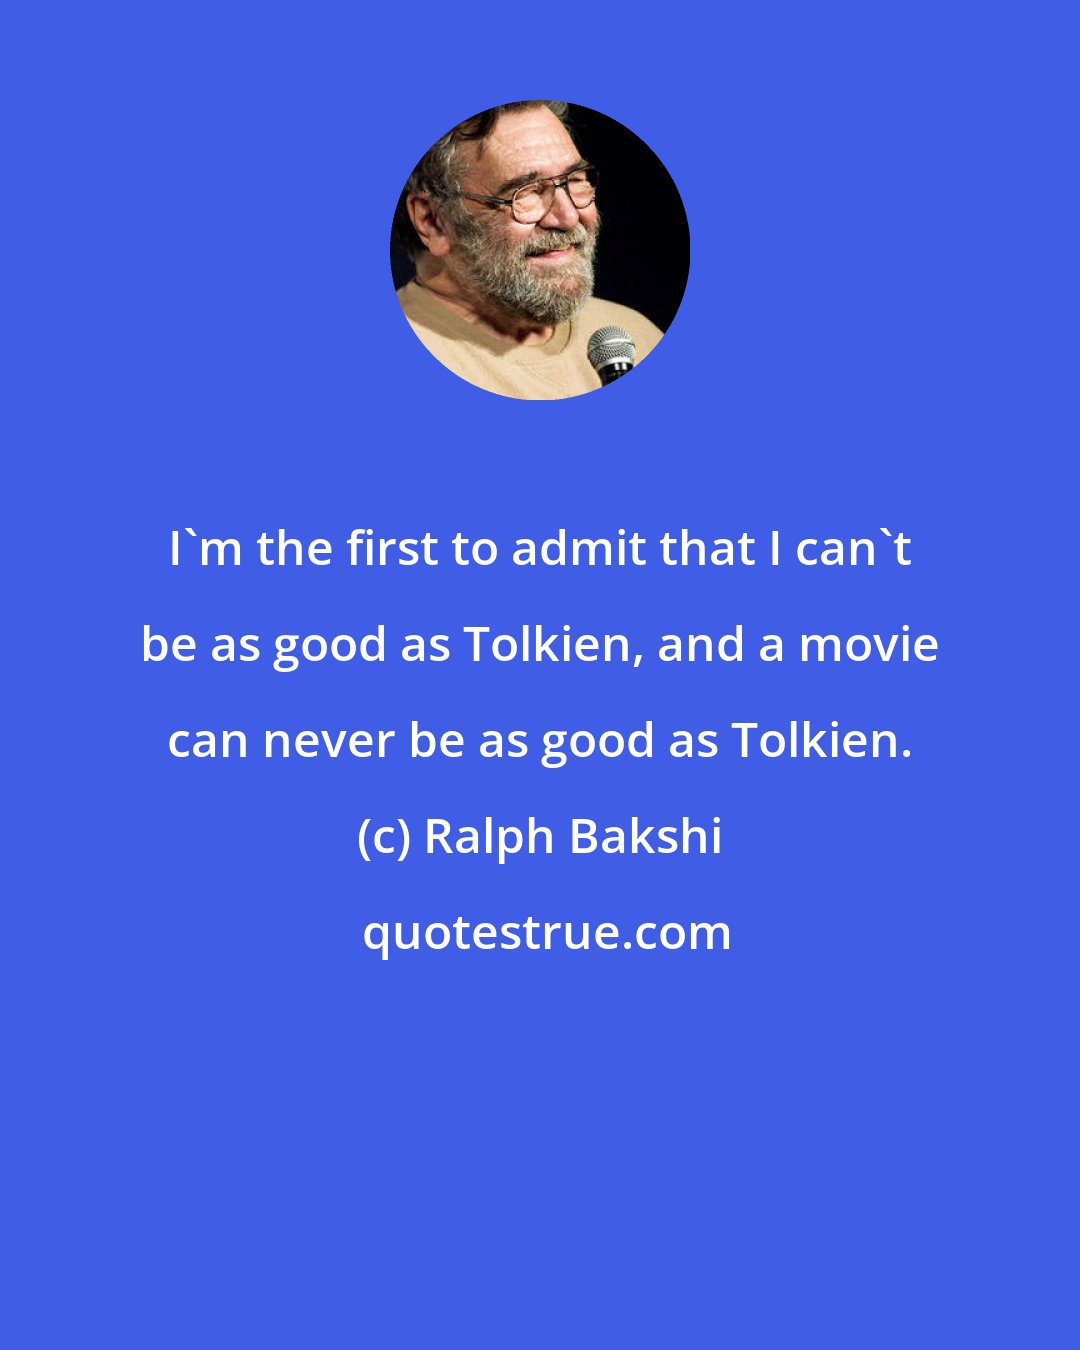 Ralph Bakshi: I'm the first to admit that I can't be as good as Tolkien, and a movie can never be as good as Tolkien.